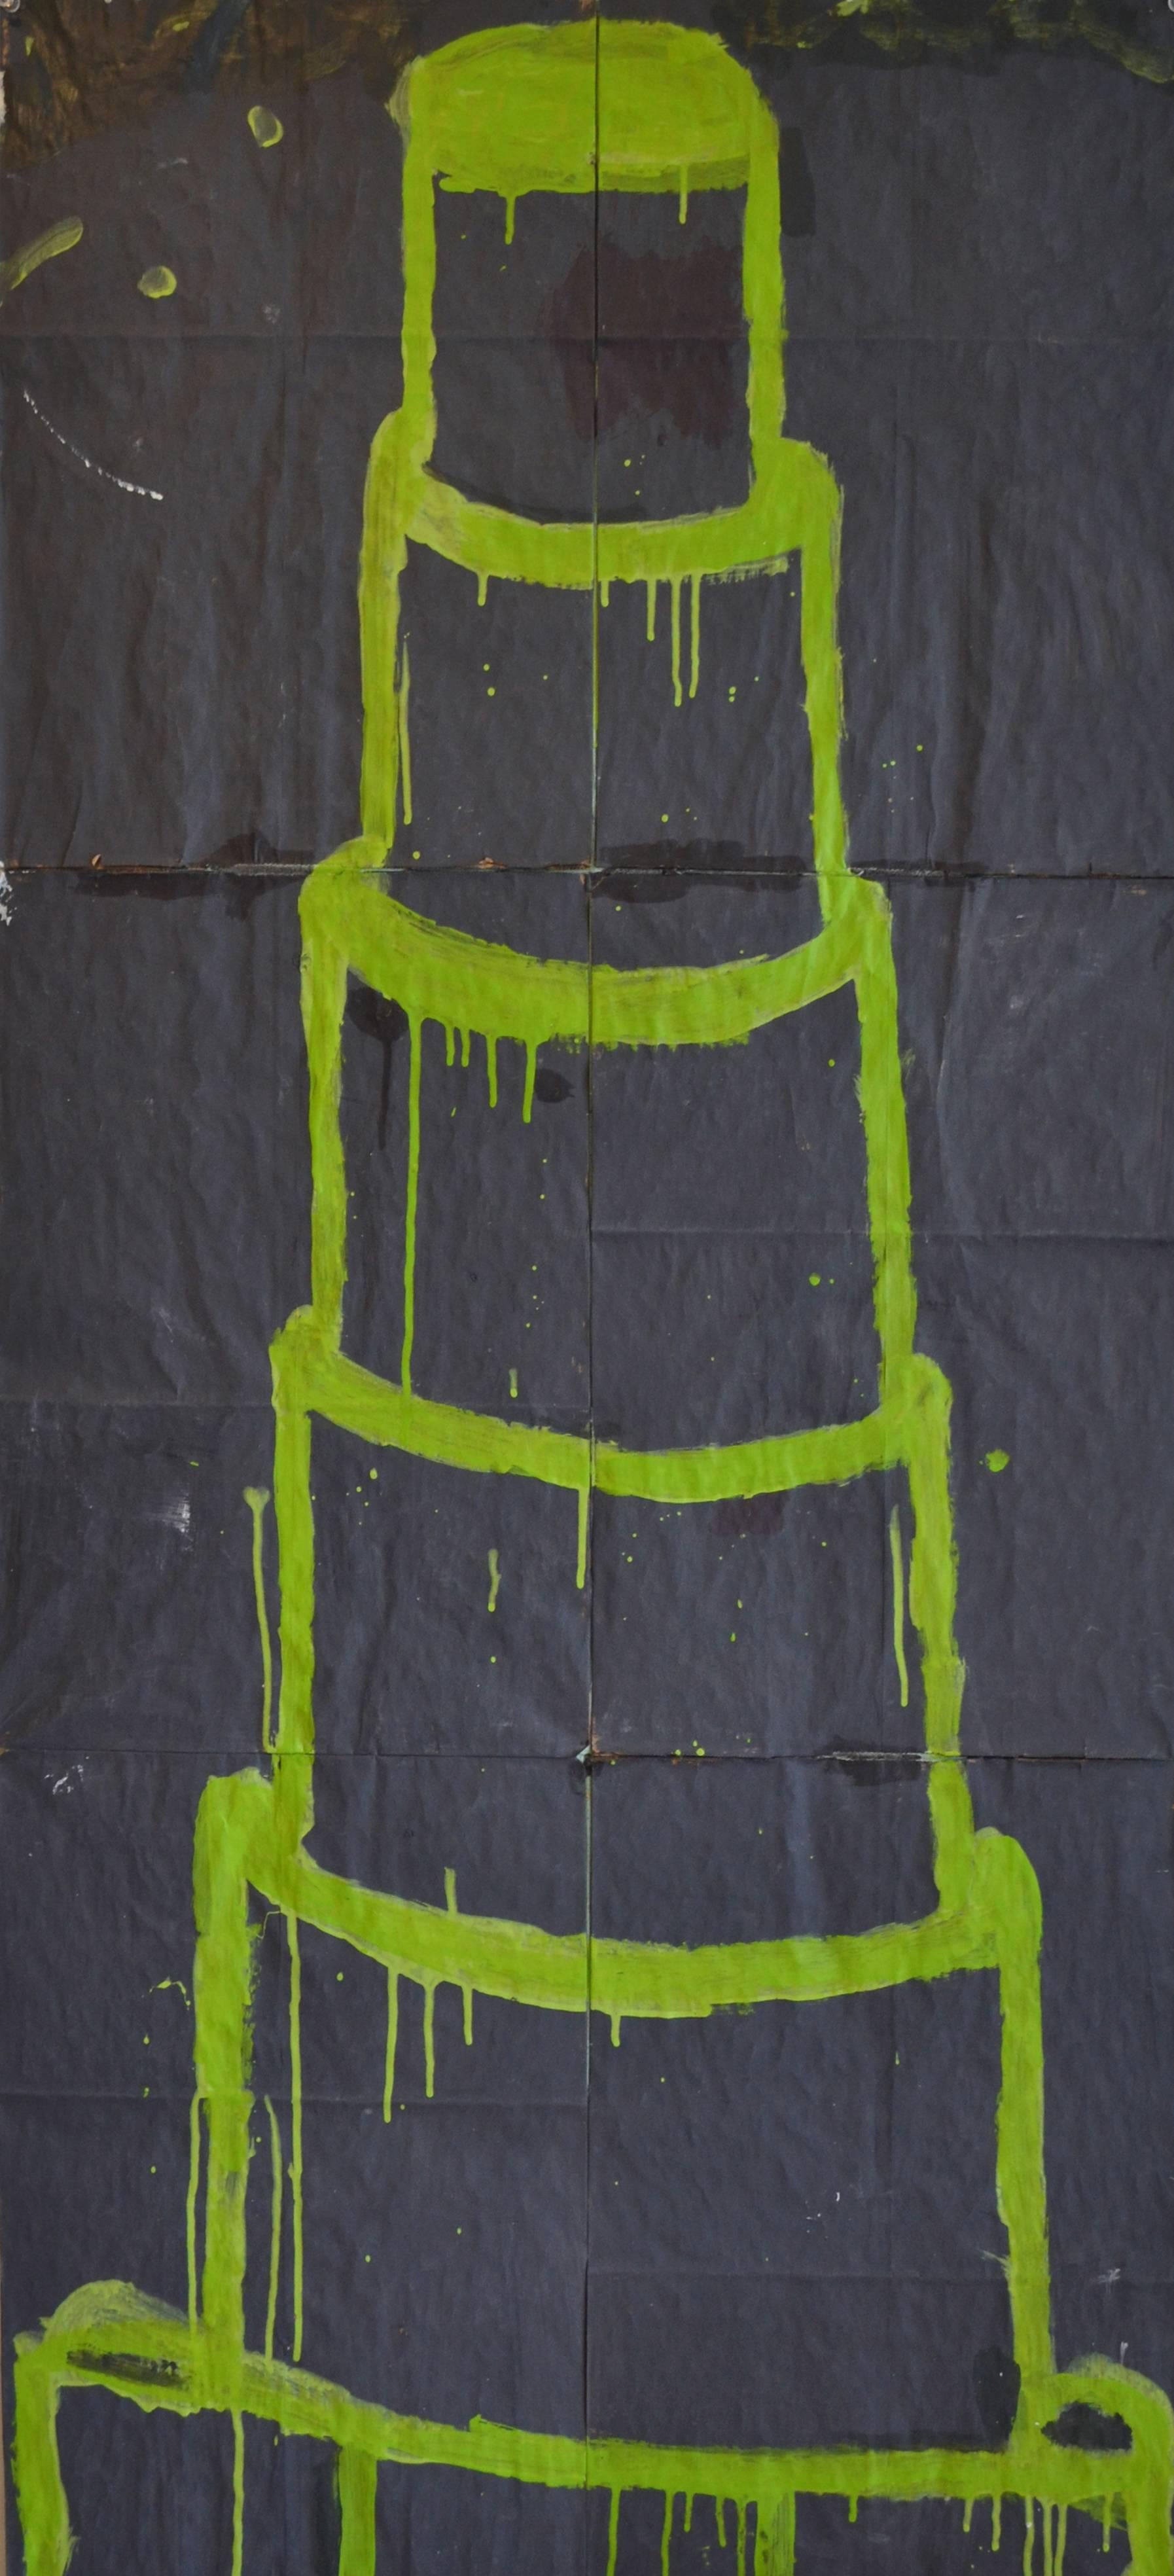 Cake 5 by Gary Komarin, 2010-2015. Mixed media on paper, 51 x 23 1/2 inches. This  is a faux naive style painting of a green six layer cake on a black background. Painted on paper bags. 

Born in 1951 in New York City, Gary Komarin is an American